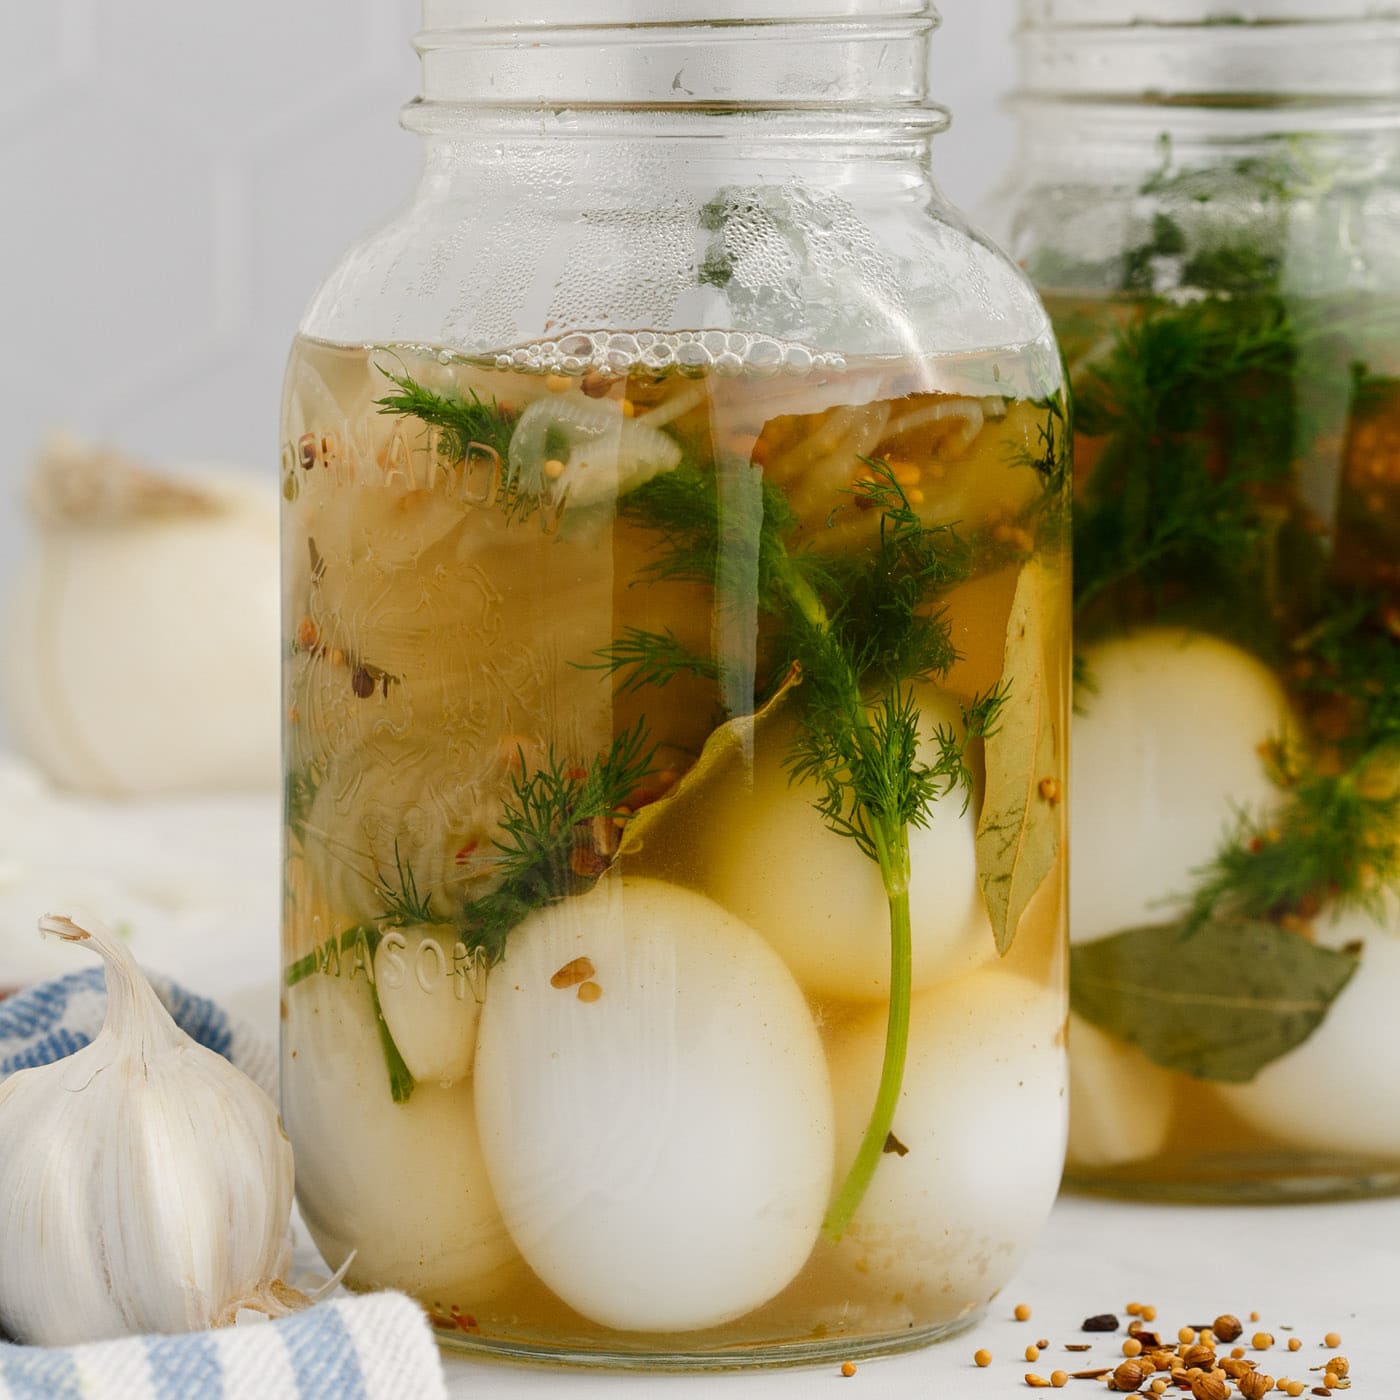 brine added to eggs with herbs in a mason jar